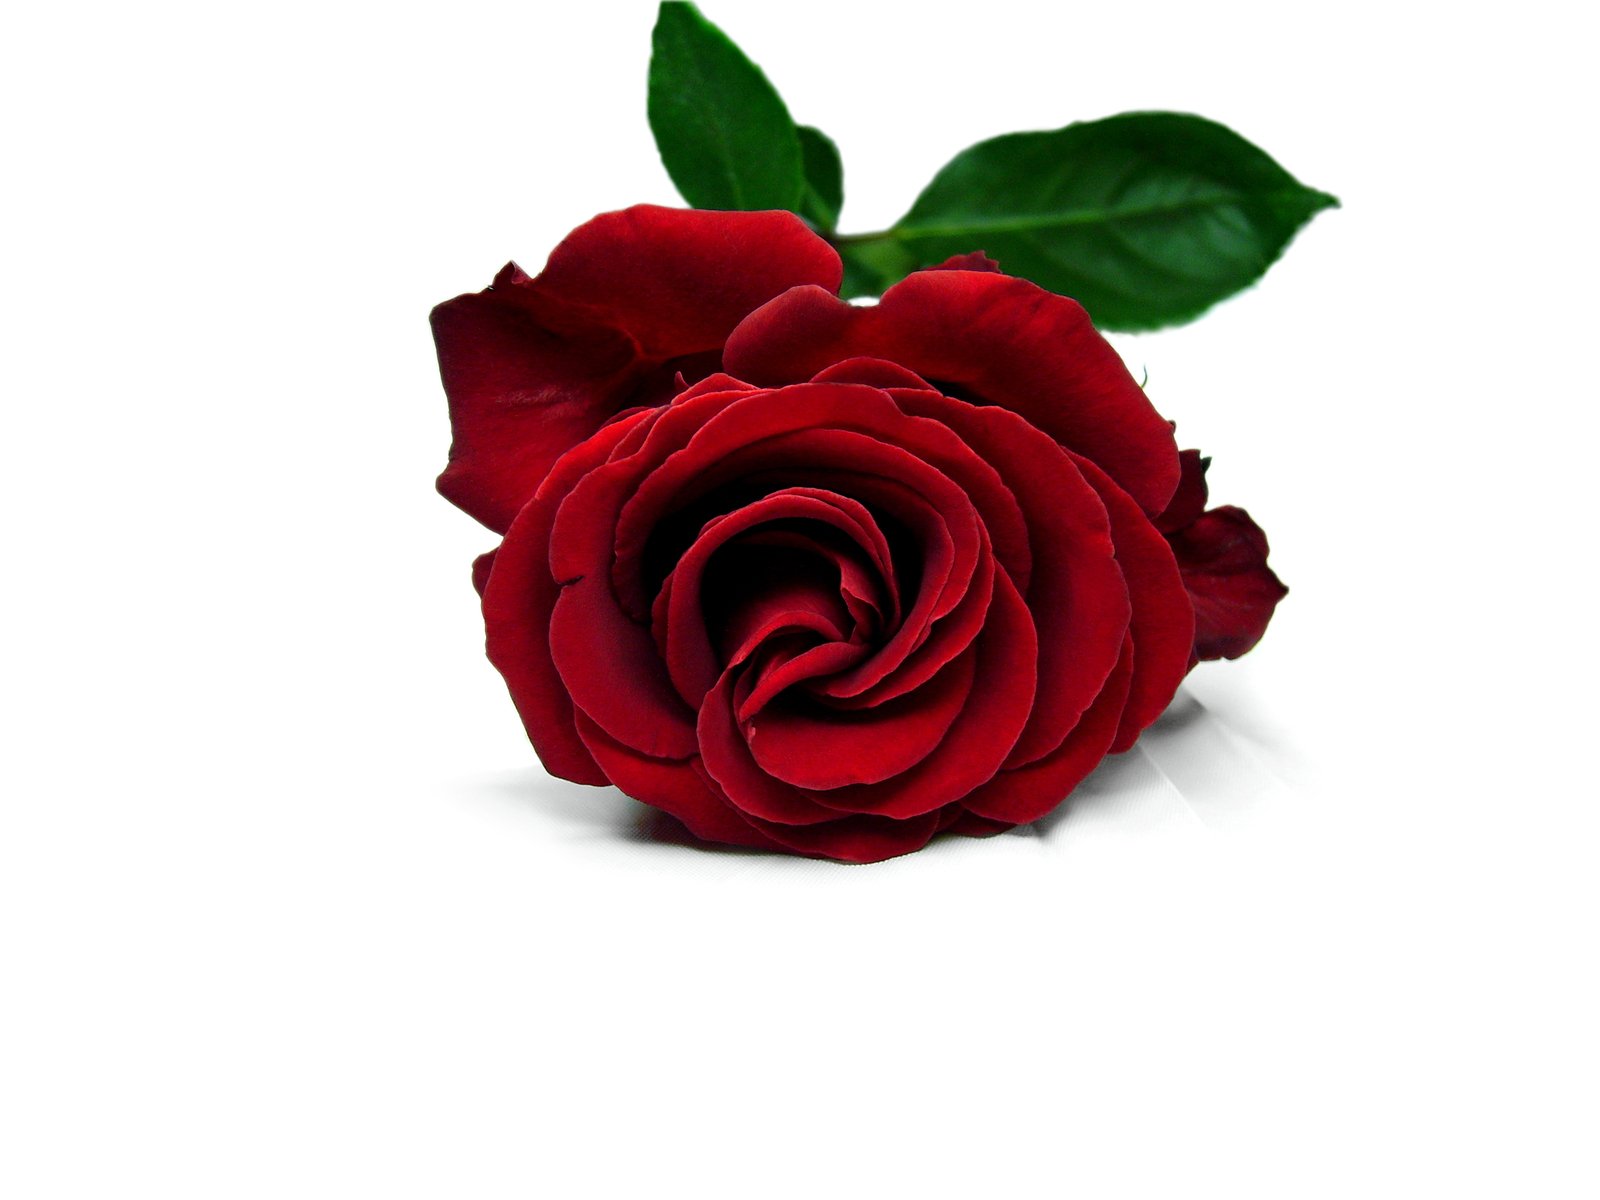 a single red rose with a single green leaf